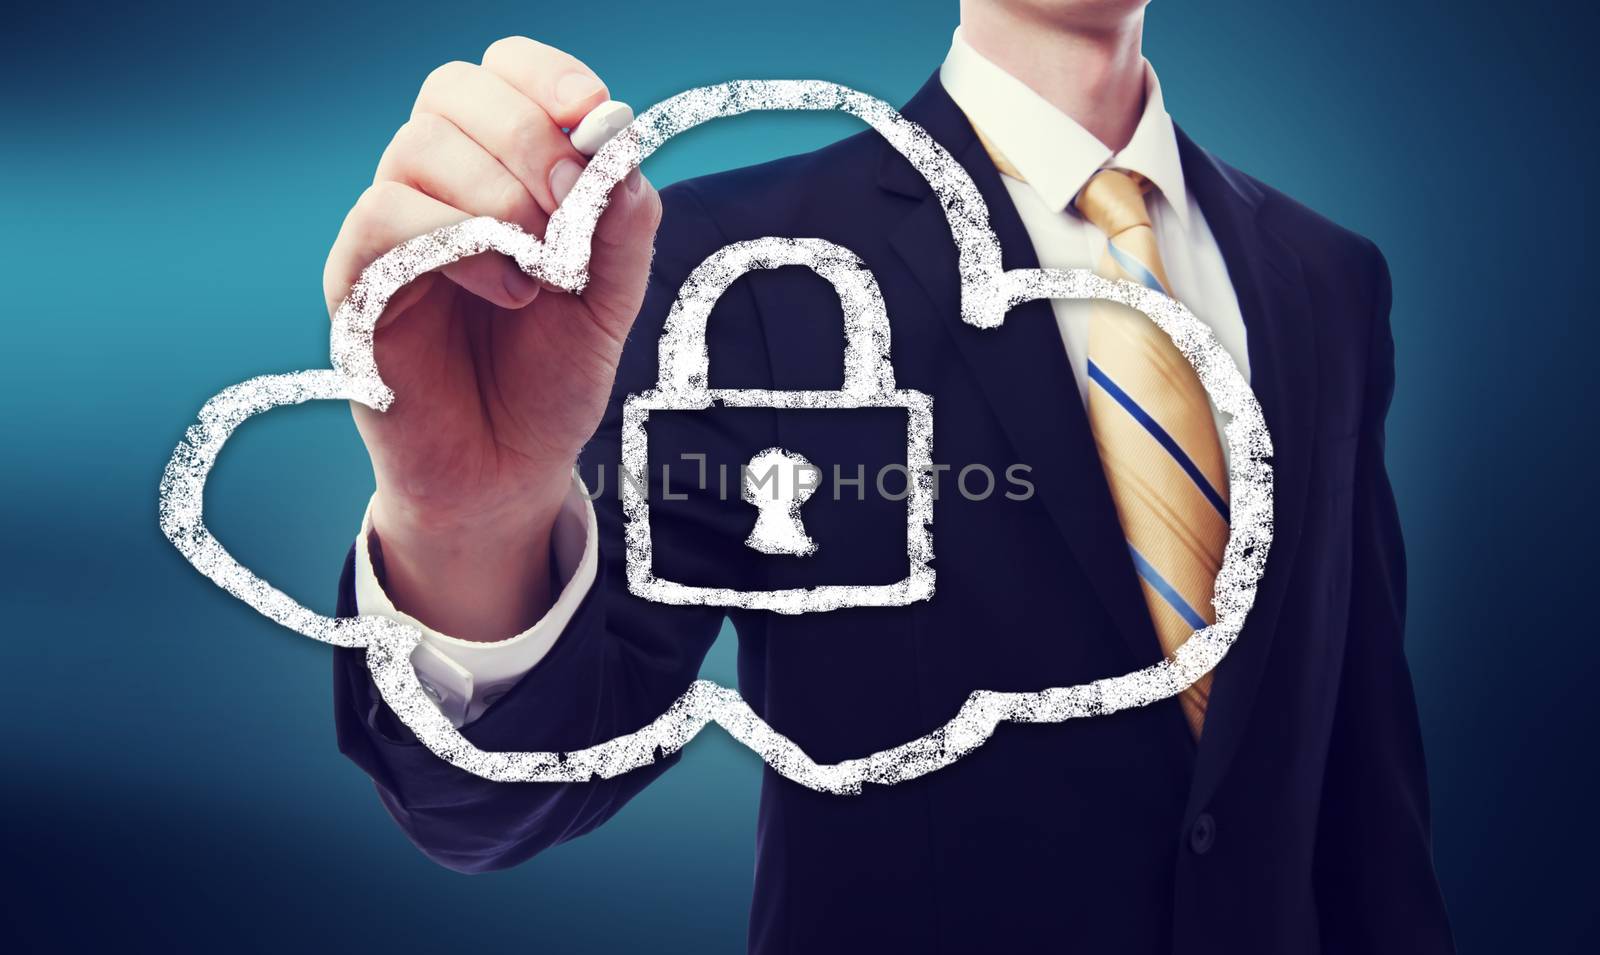 Secure Online Cloud Computing Concept with Business Man 